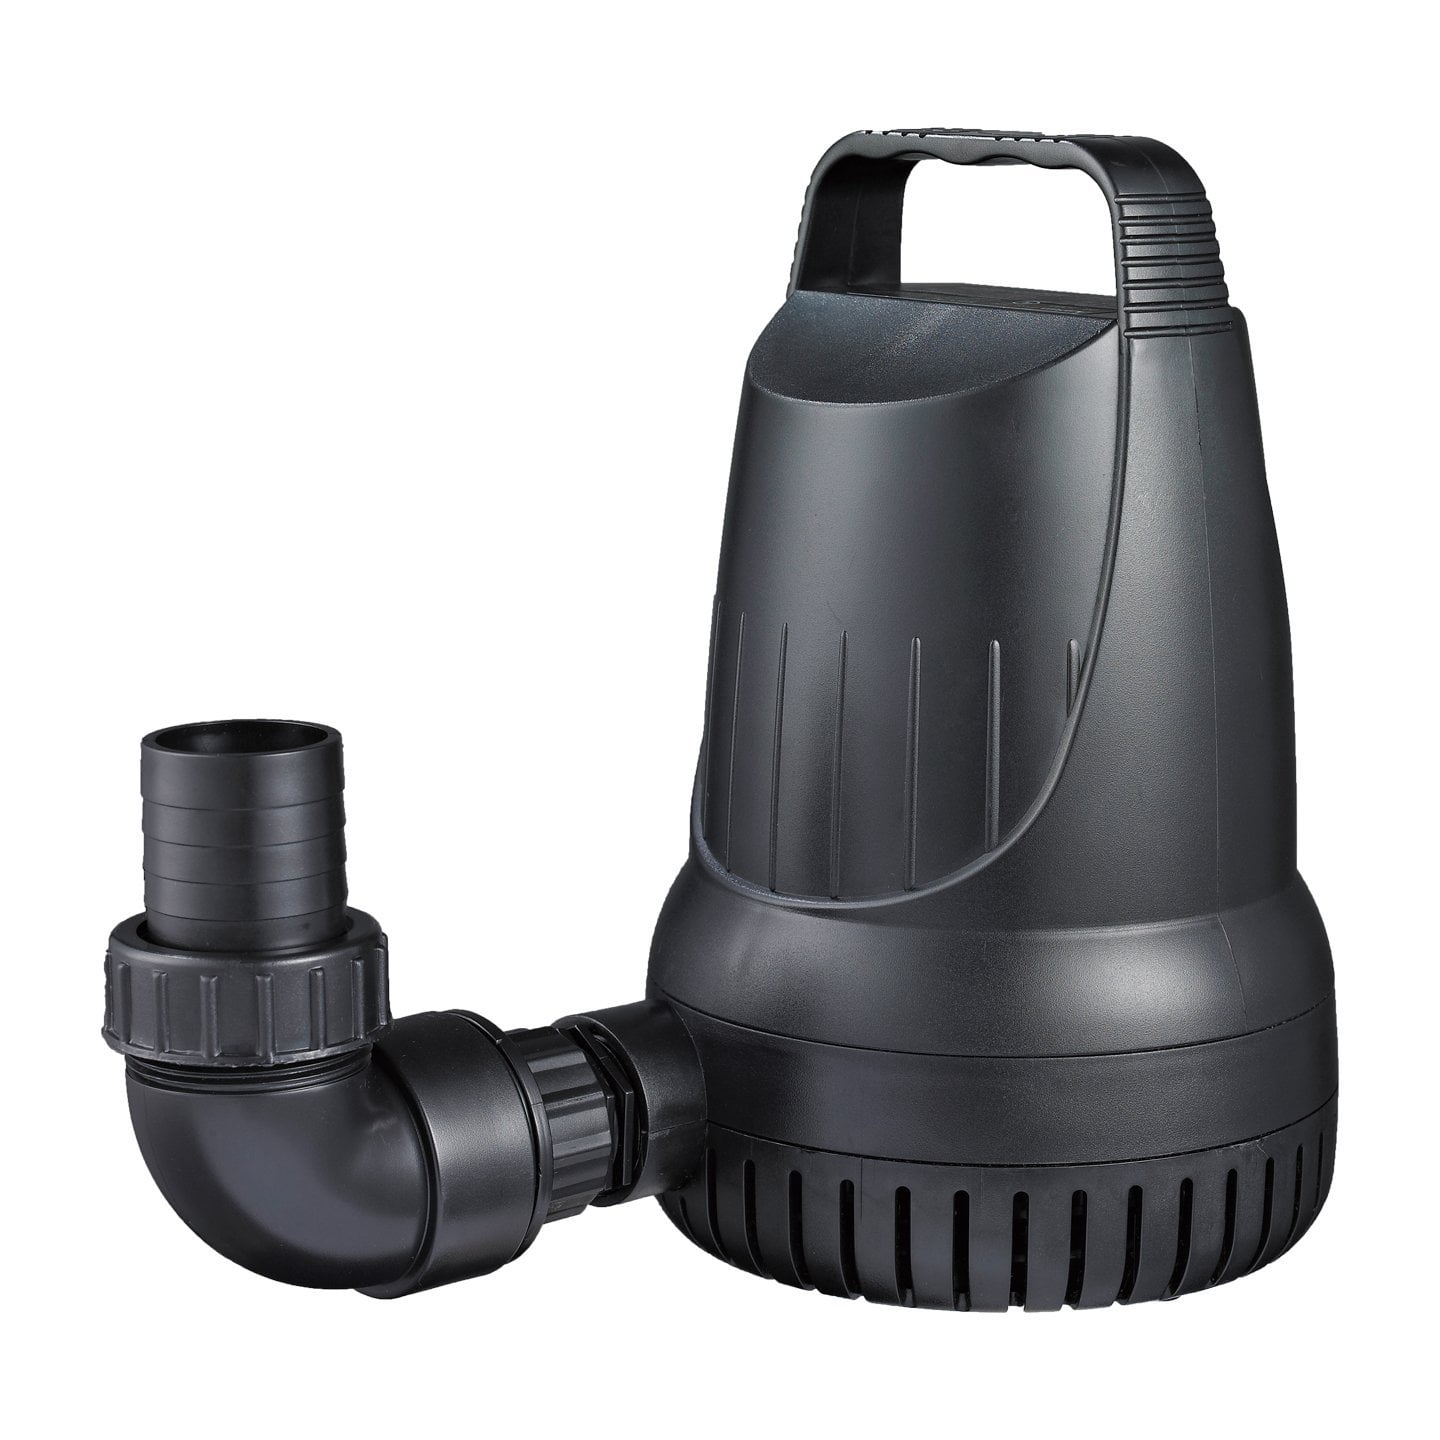 Manta 2,100 GPH Magnetic Drive Submersible Pump Up To 2,100 GPH Max Flow 